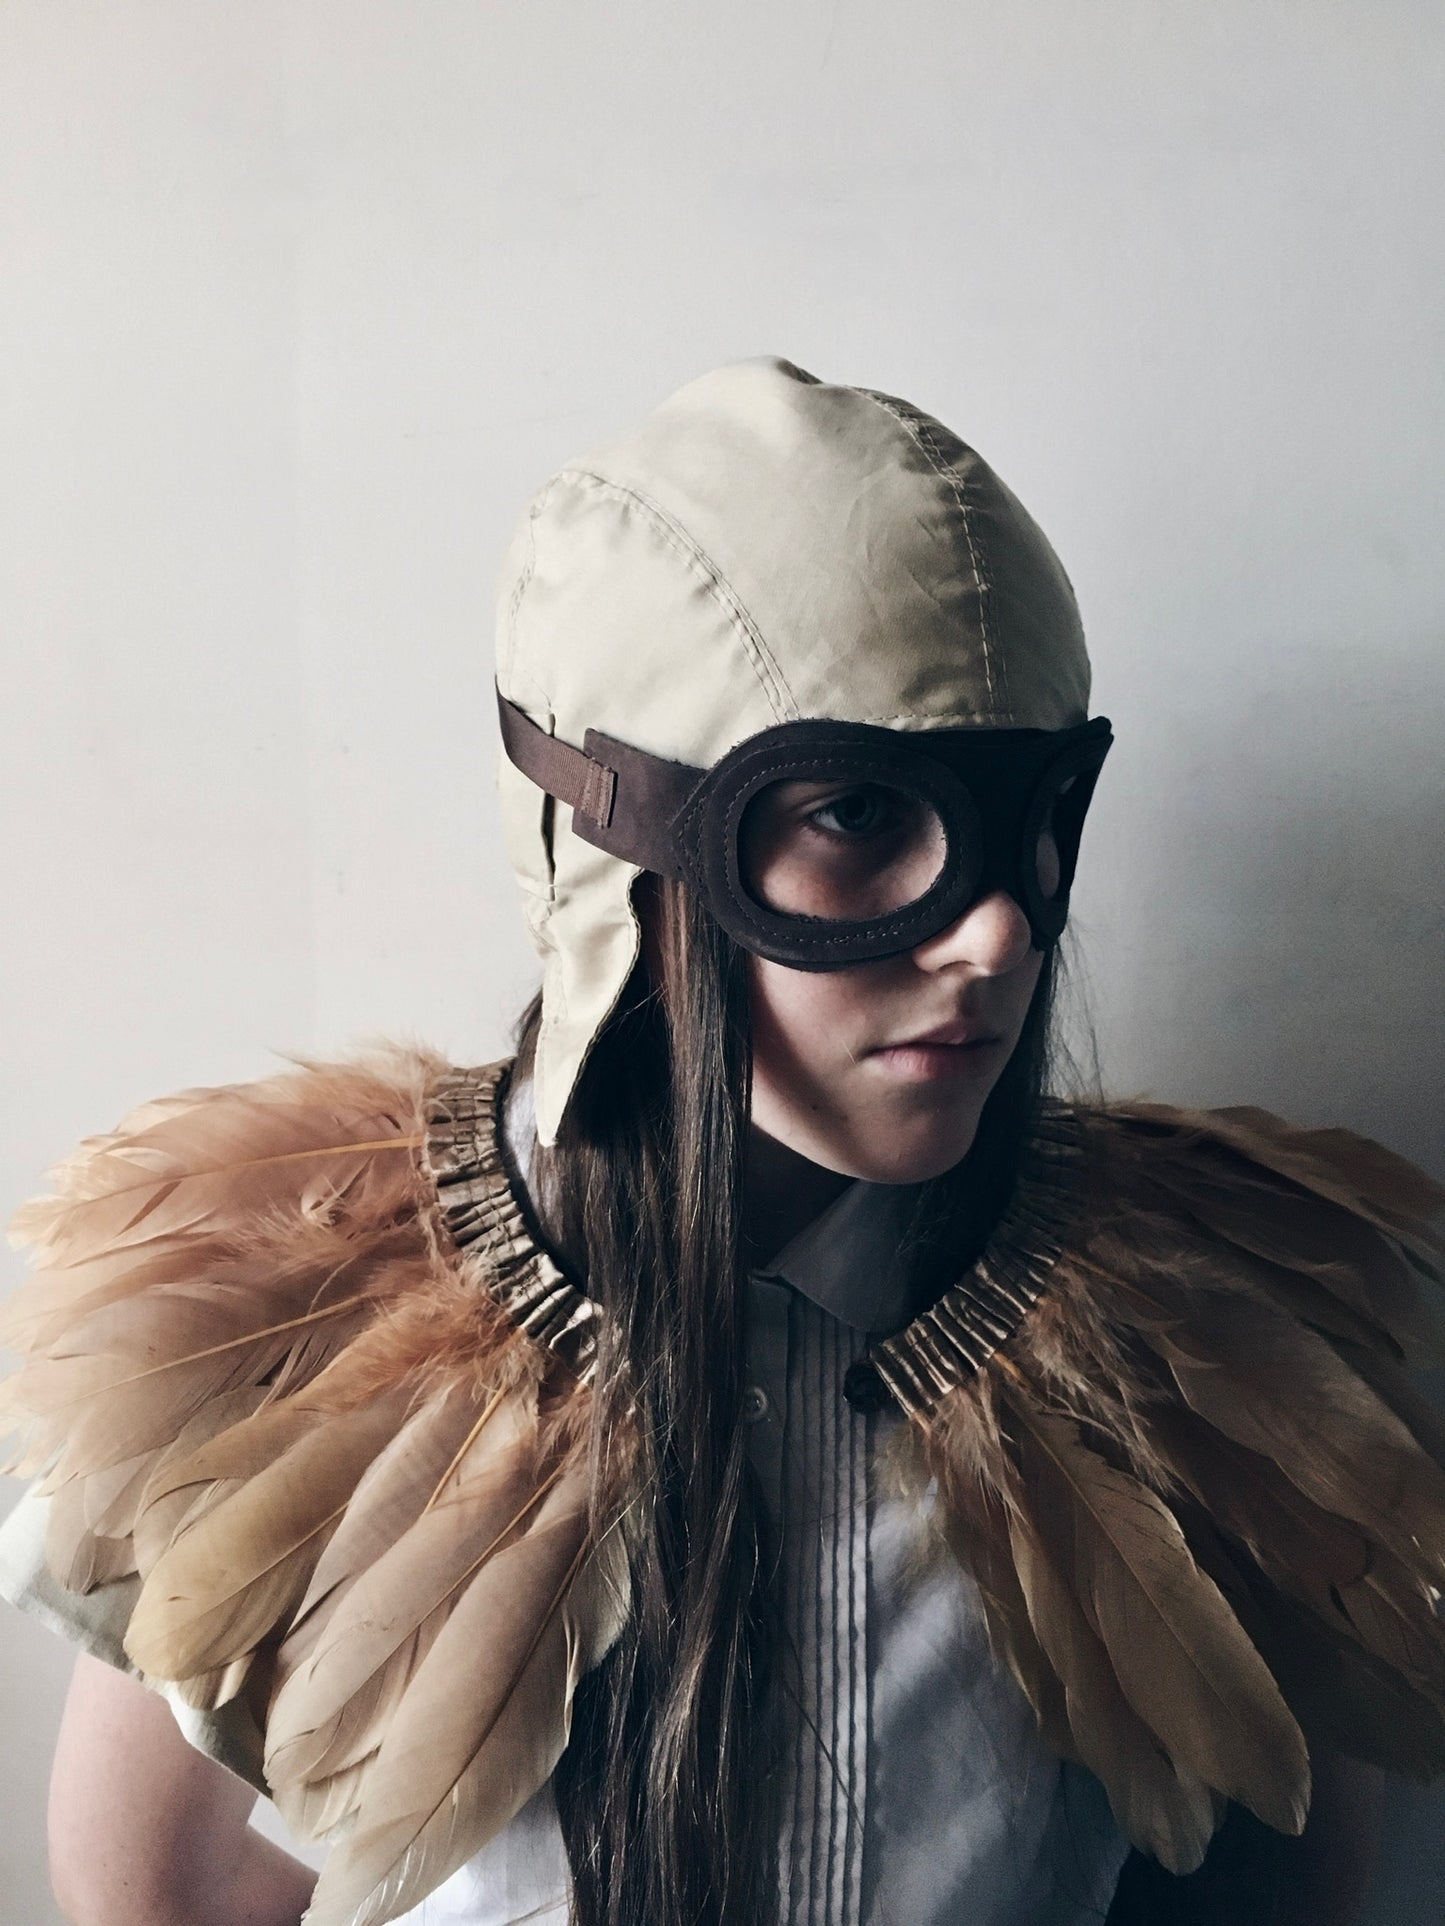 Child wearing a vintage inspired flying costume